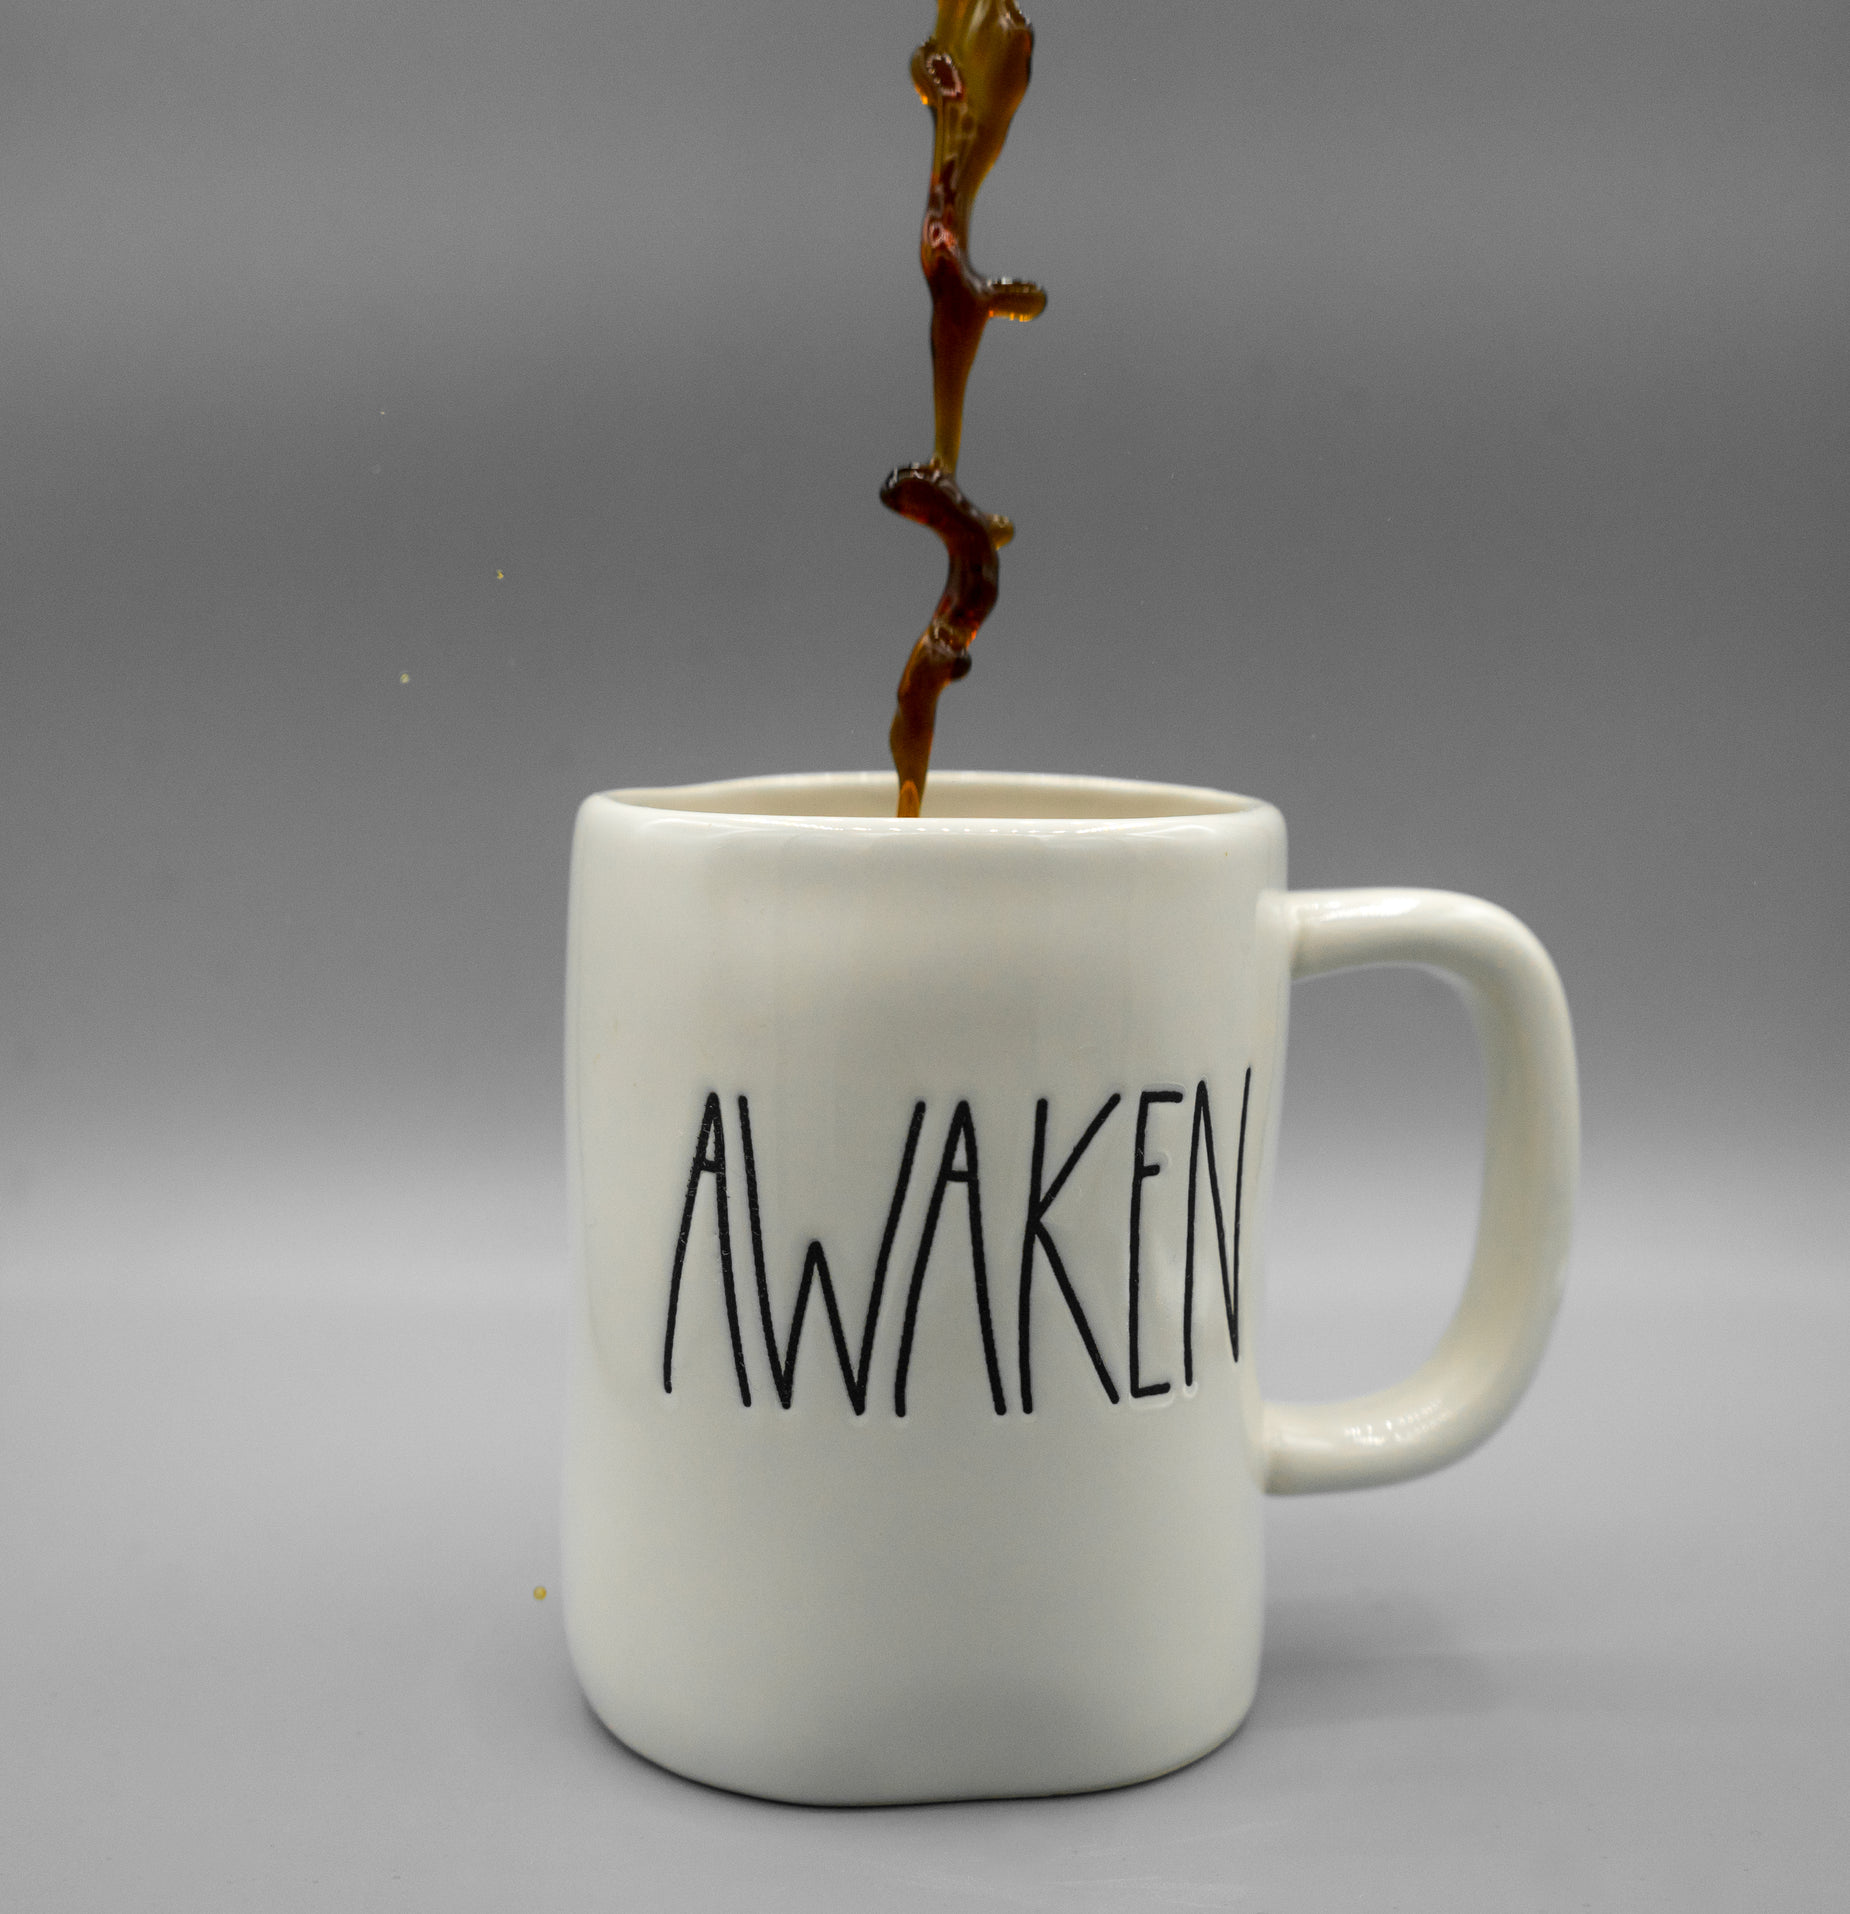 coffee is spilled into a ceramic cup with the word awaken